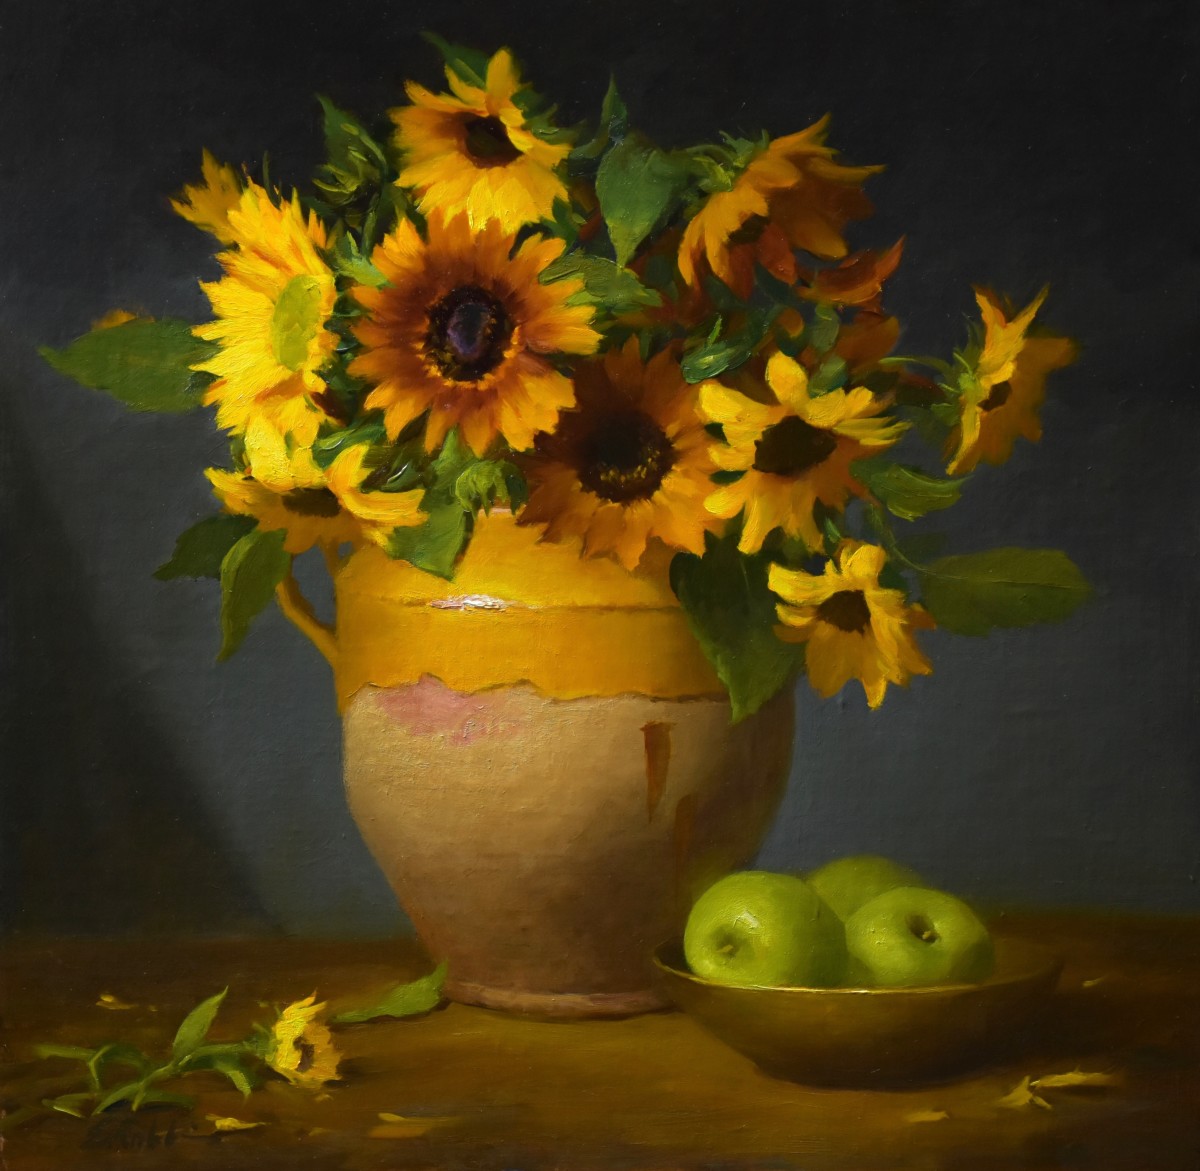 Sunflowers and Green Apples by Elizabeth Robbins 